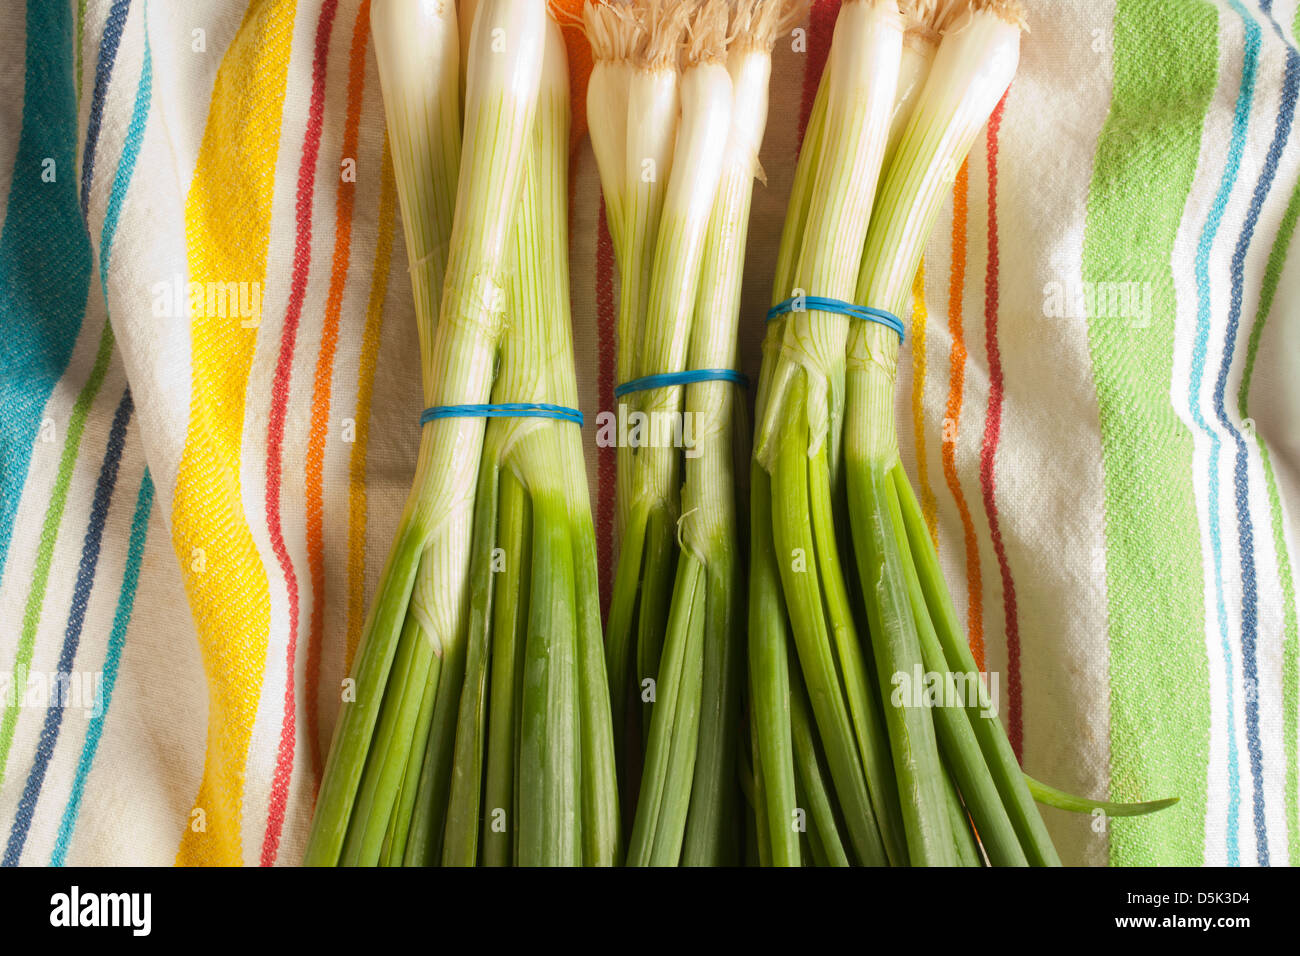 Bunches of Scallions, sometimes called long or green onions Stock Photo